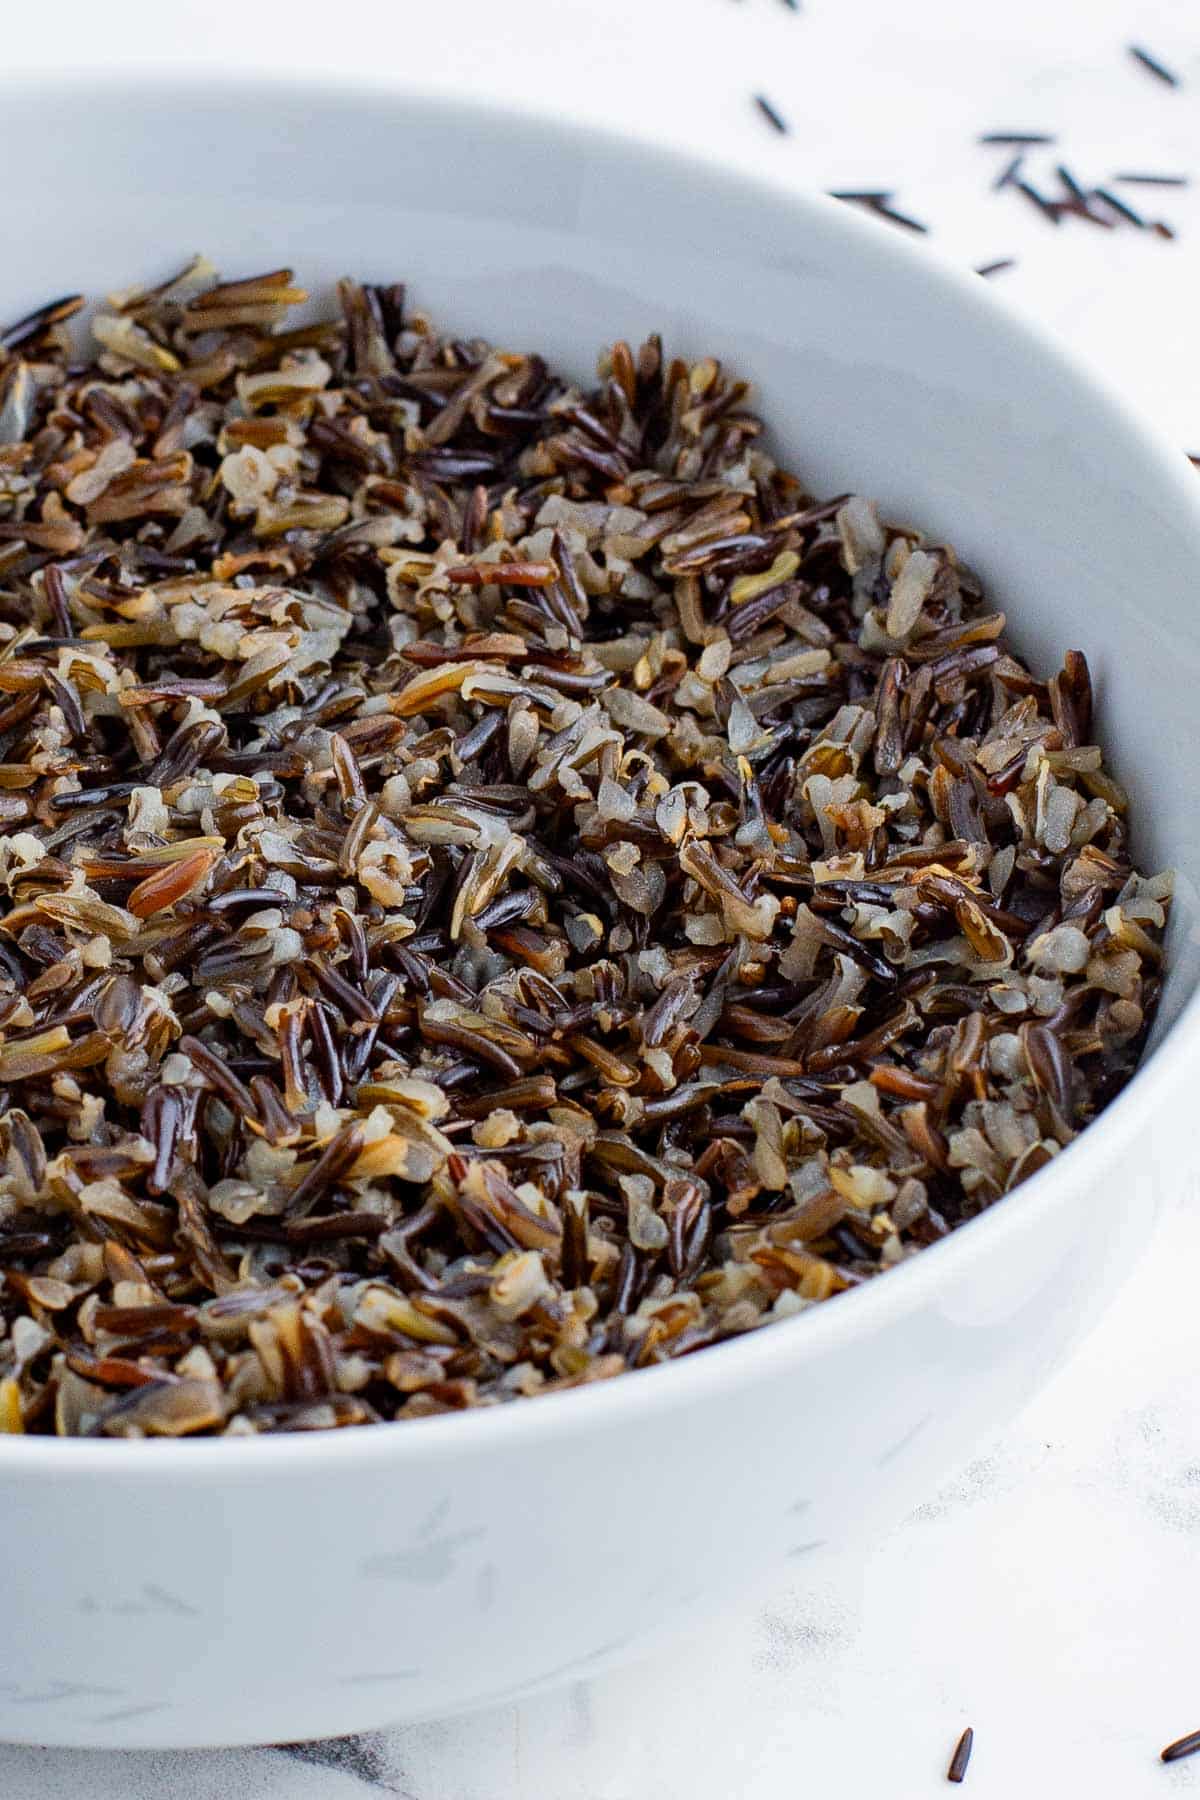 Wild rice is a superfood, serve this grain up as a healthy and flavorful side dish.